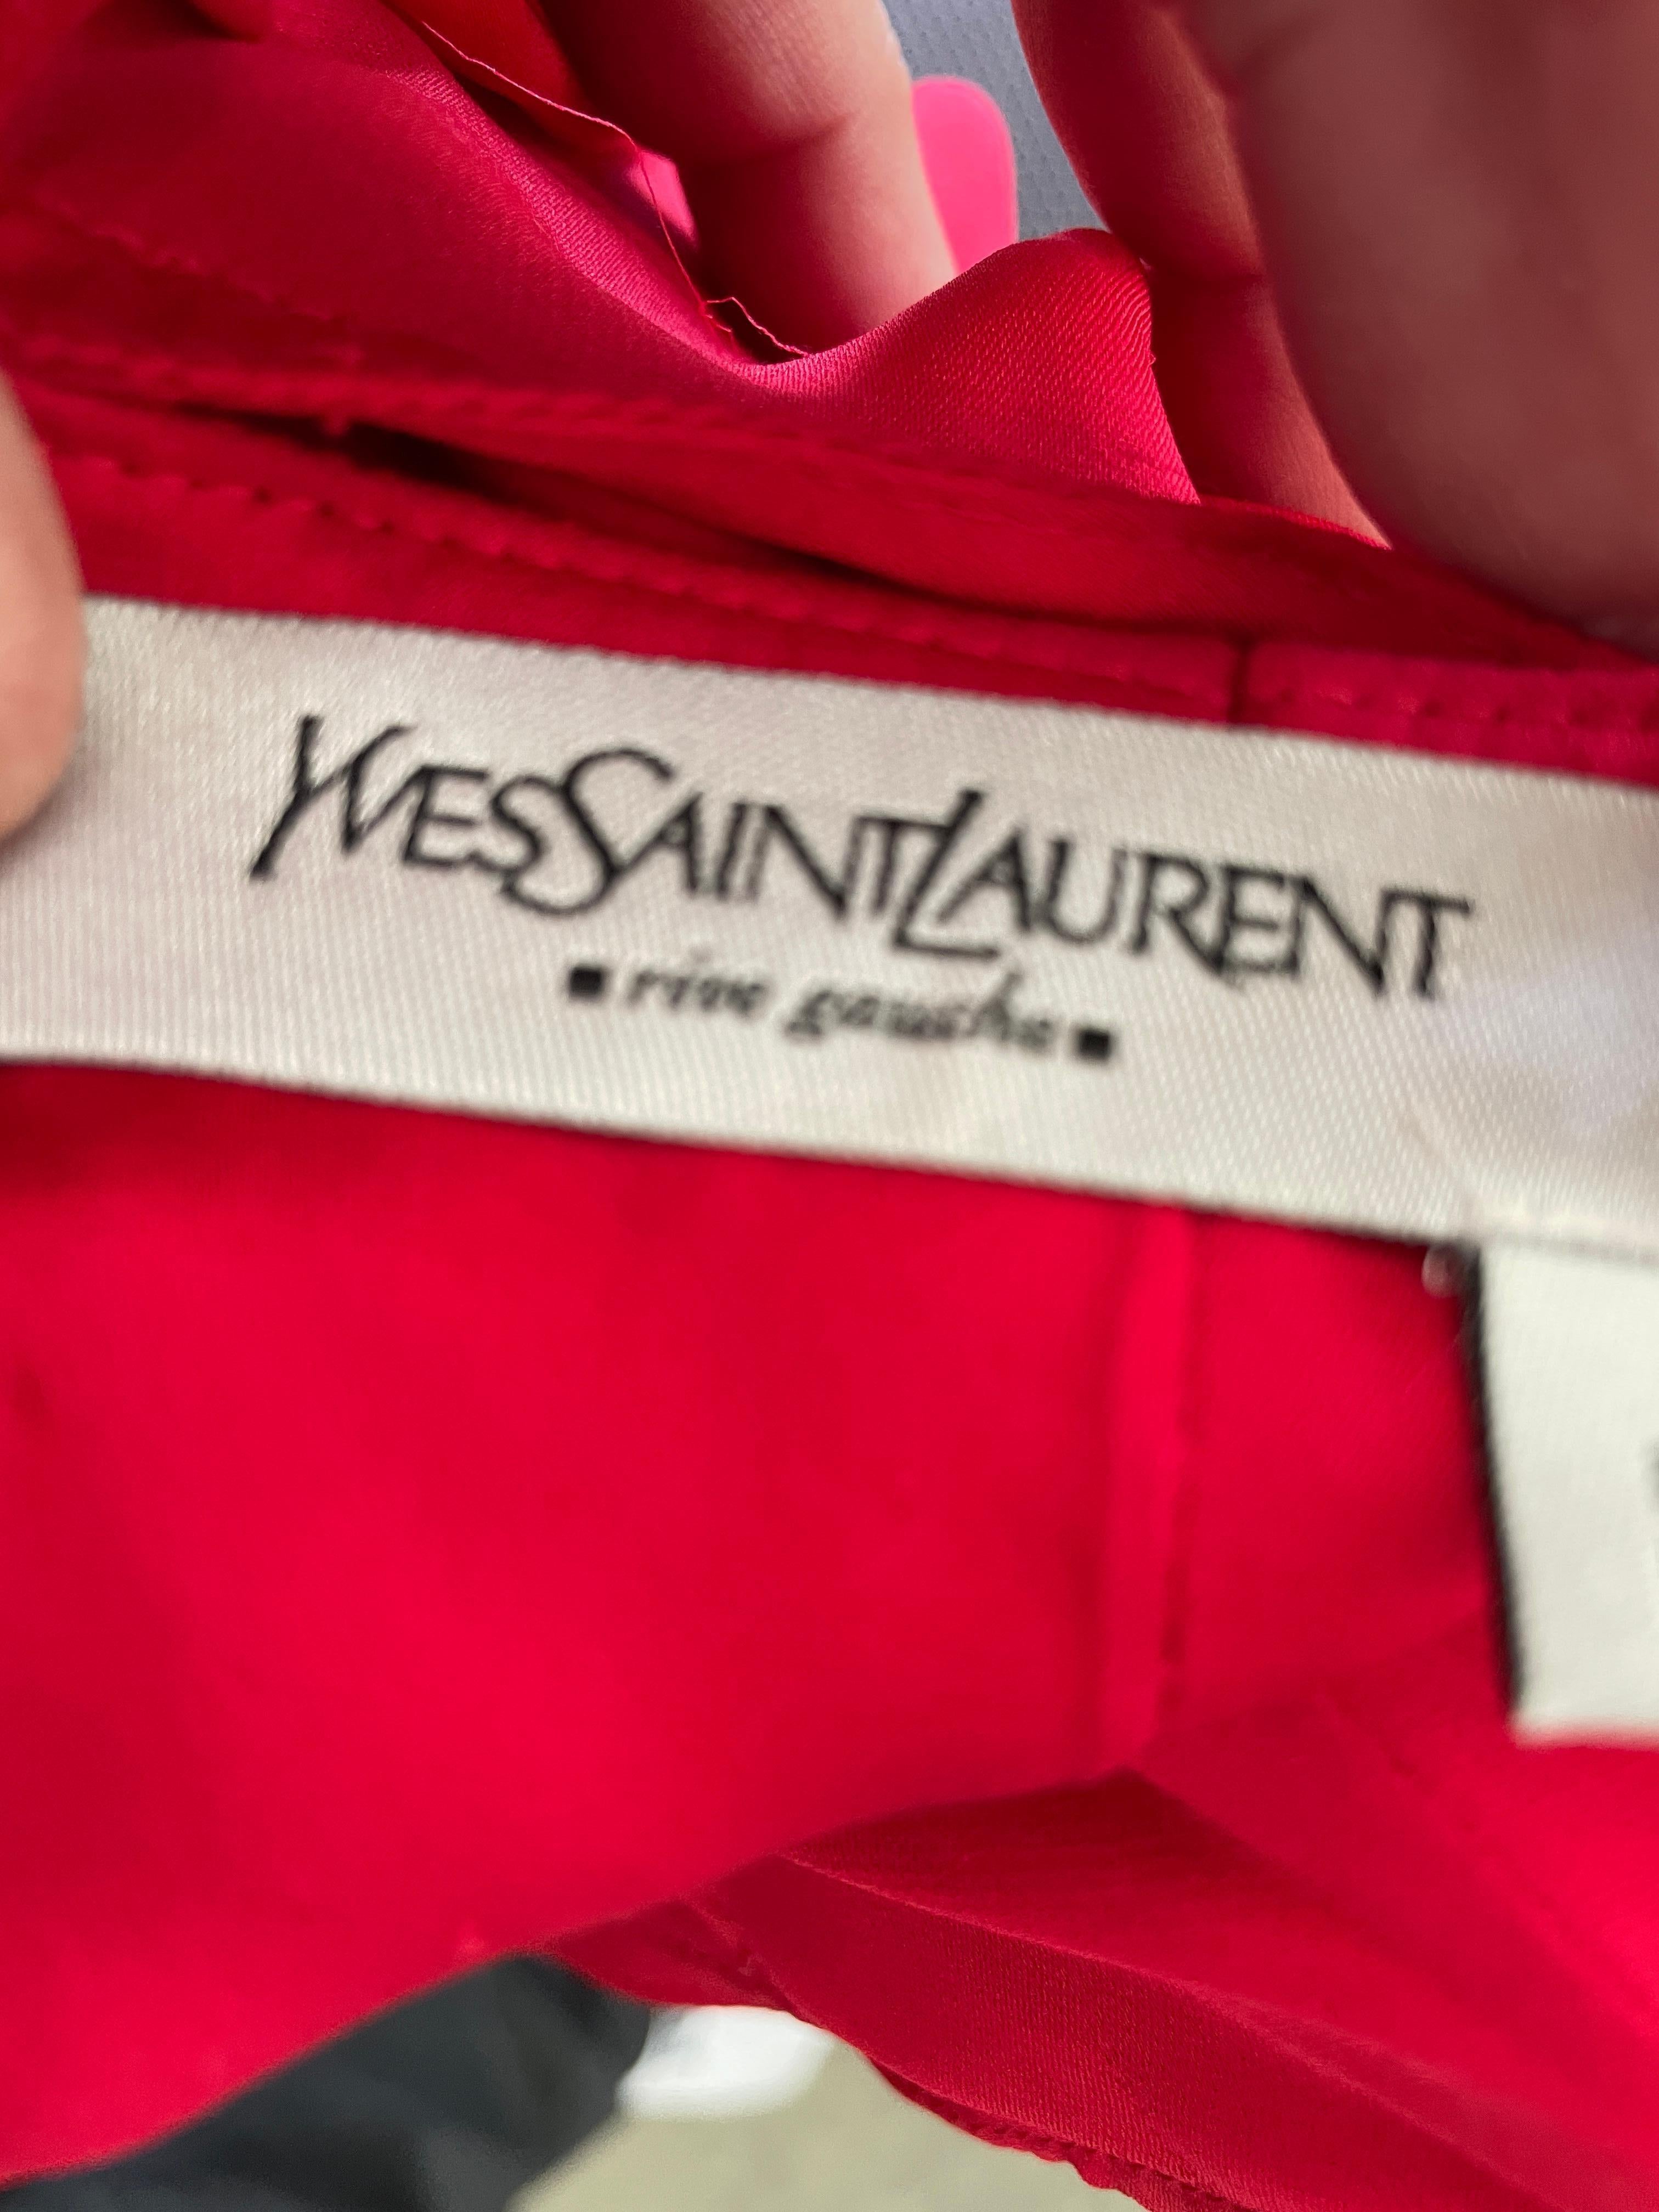 Yves Saint Laurent by Tom Ford 2003 Ruffled Red Silk Dress  For Sale 10